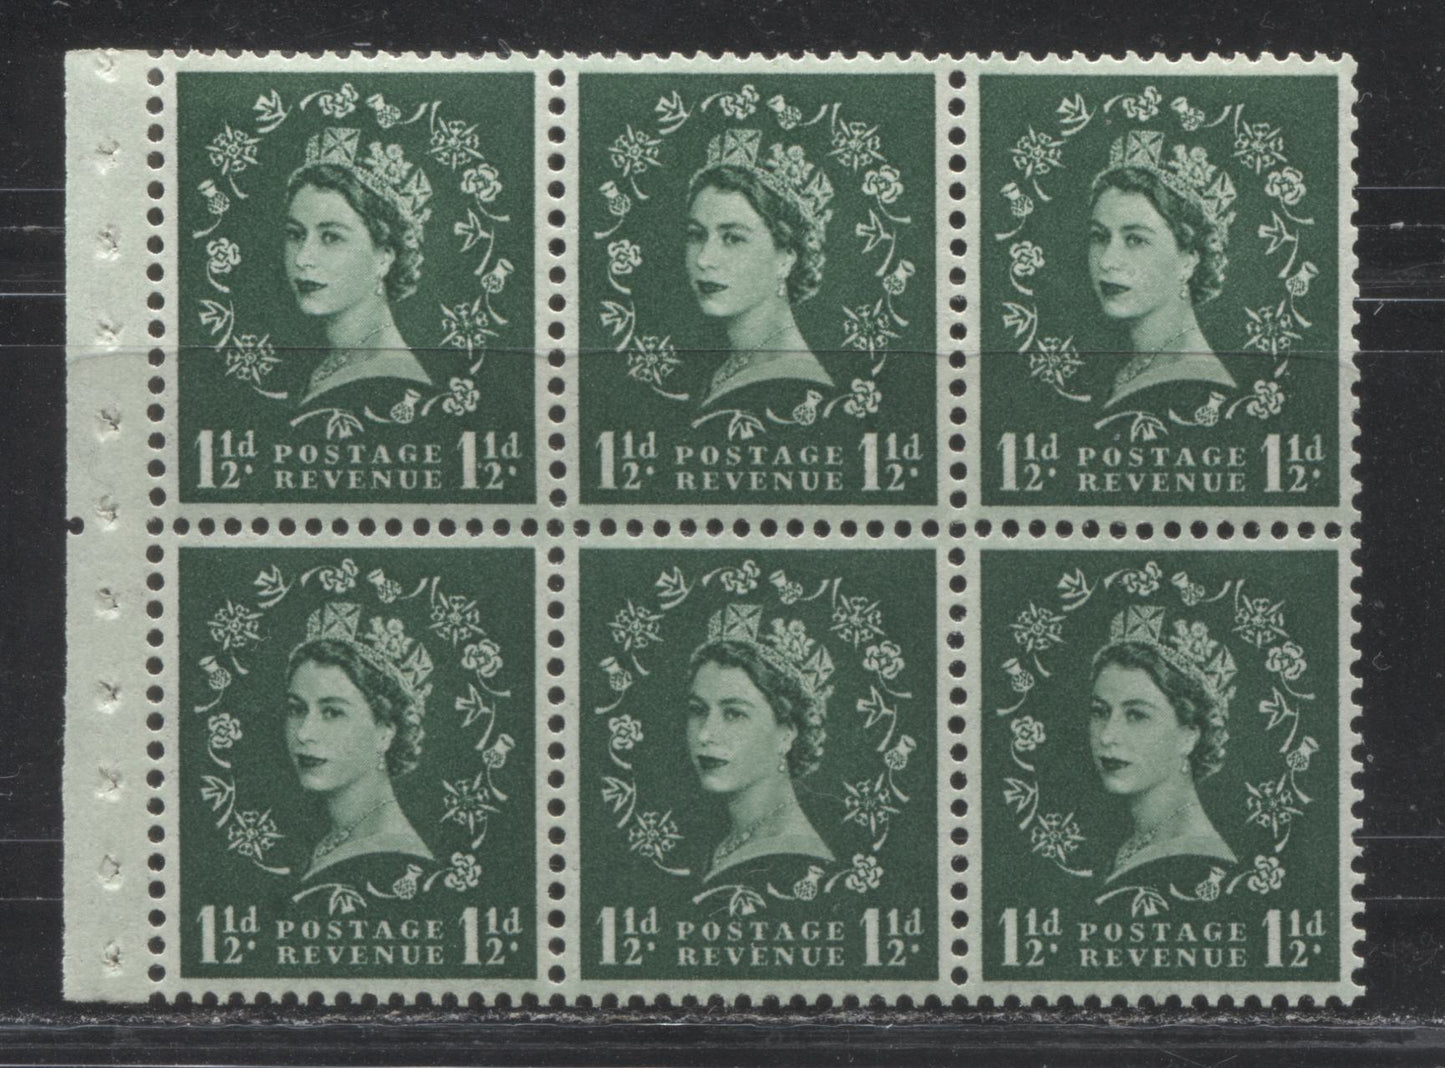 Great Britain SG#M16 3/- Brick Red & Black Cover 1959-1967 Wilding Issue, A Complete Booklet With Mixed Inverted and Upright Multiple St. Edward's Crown Watermark, Panes of 6, Type C GPO Cypher, November 1959